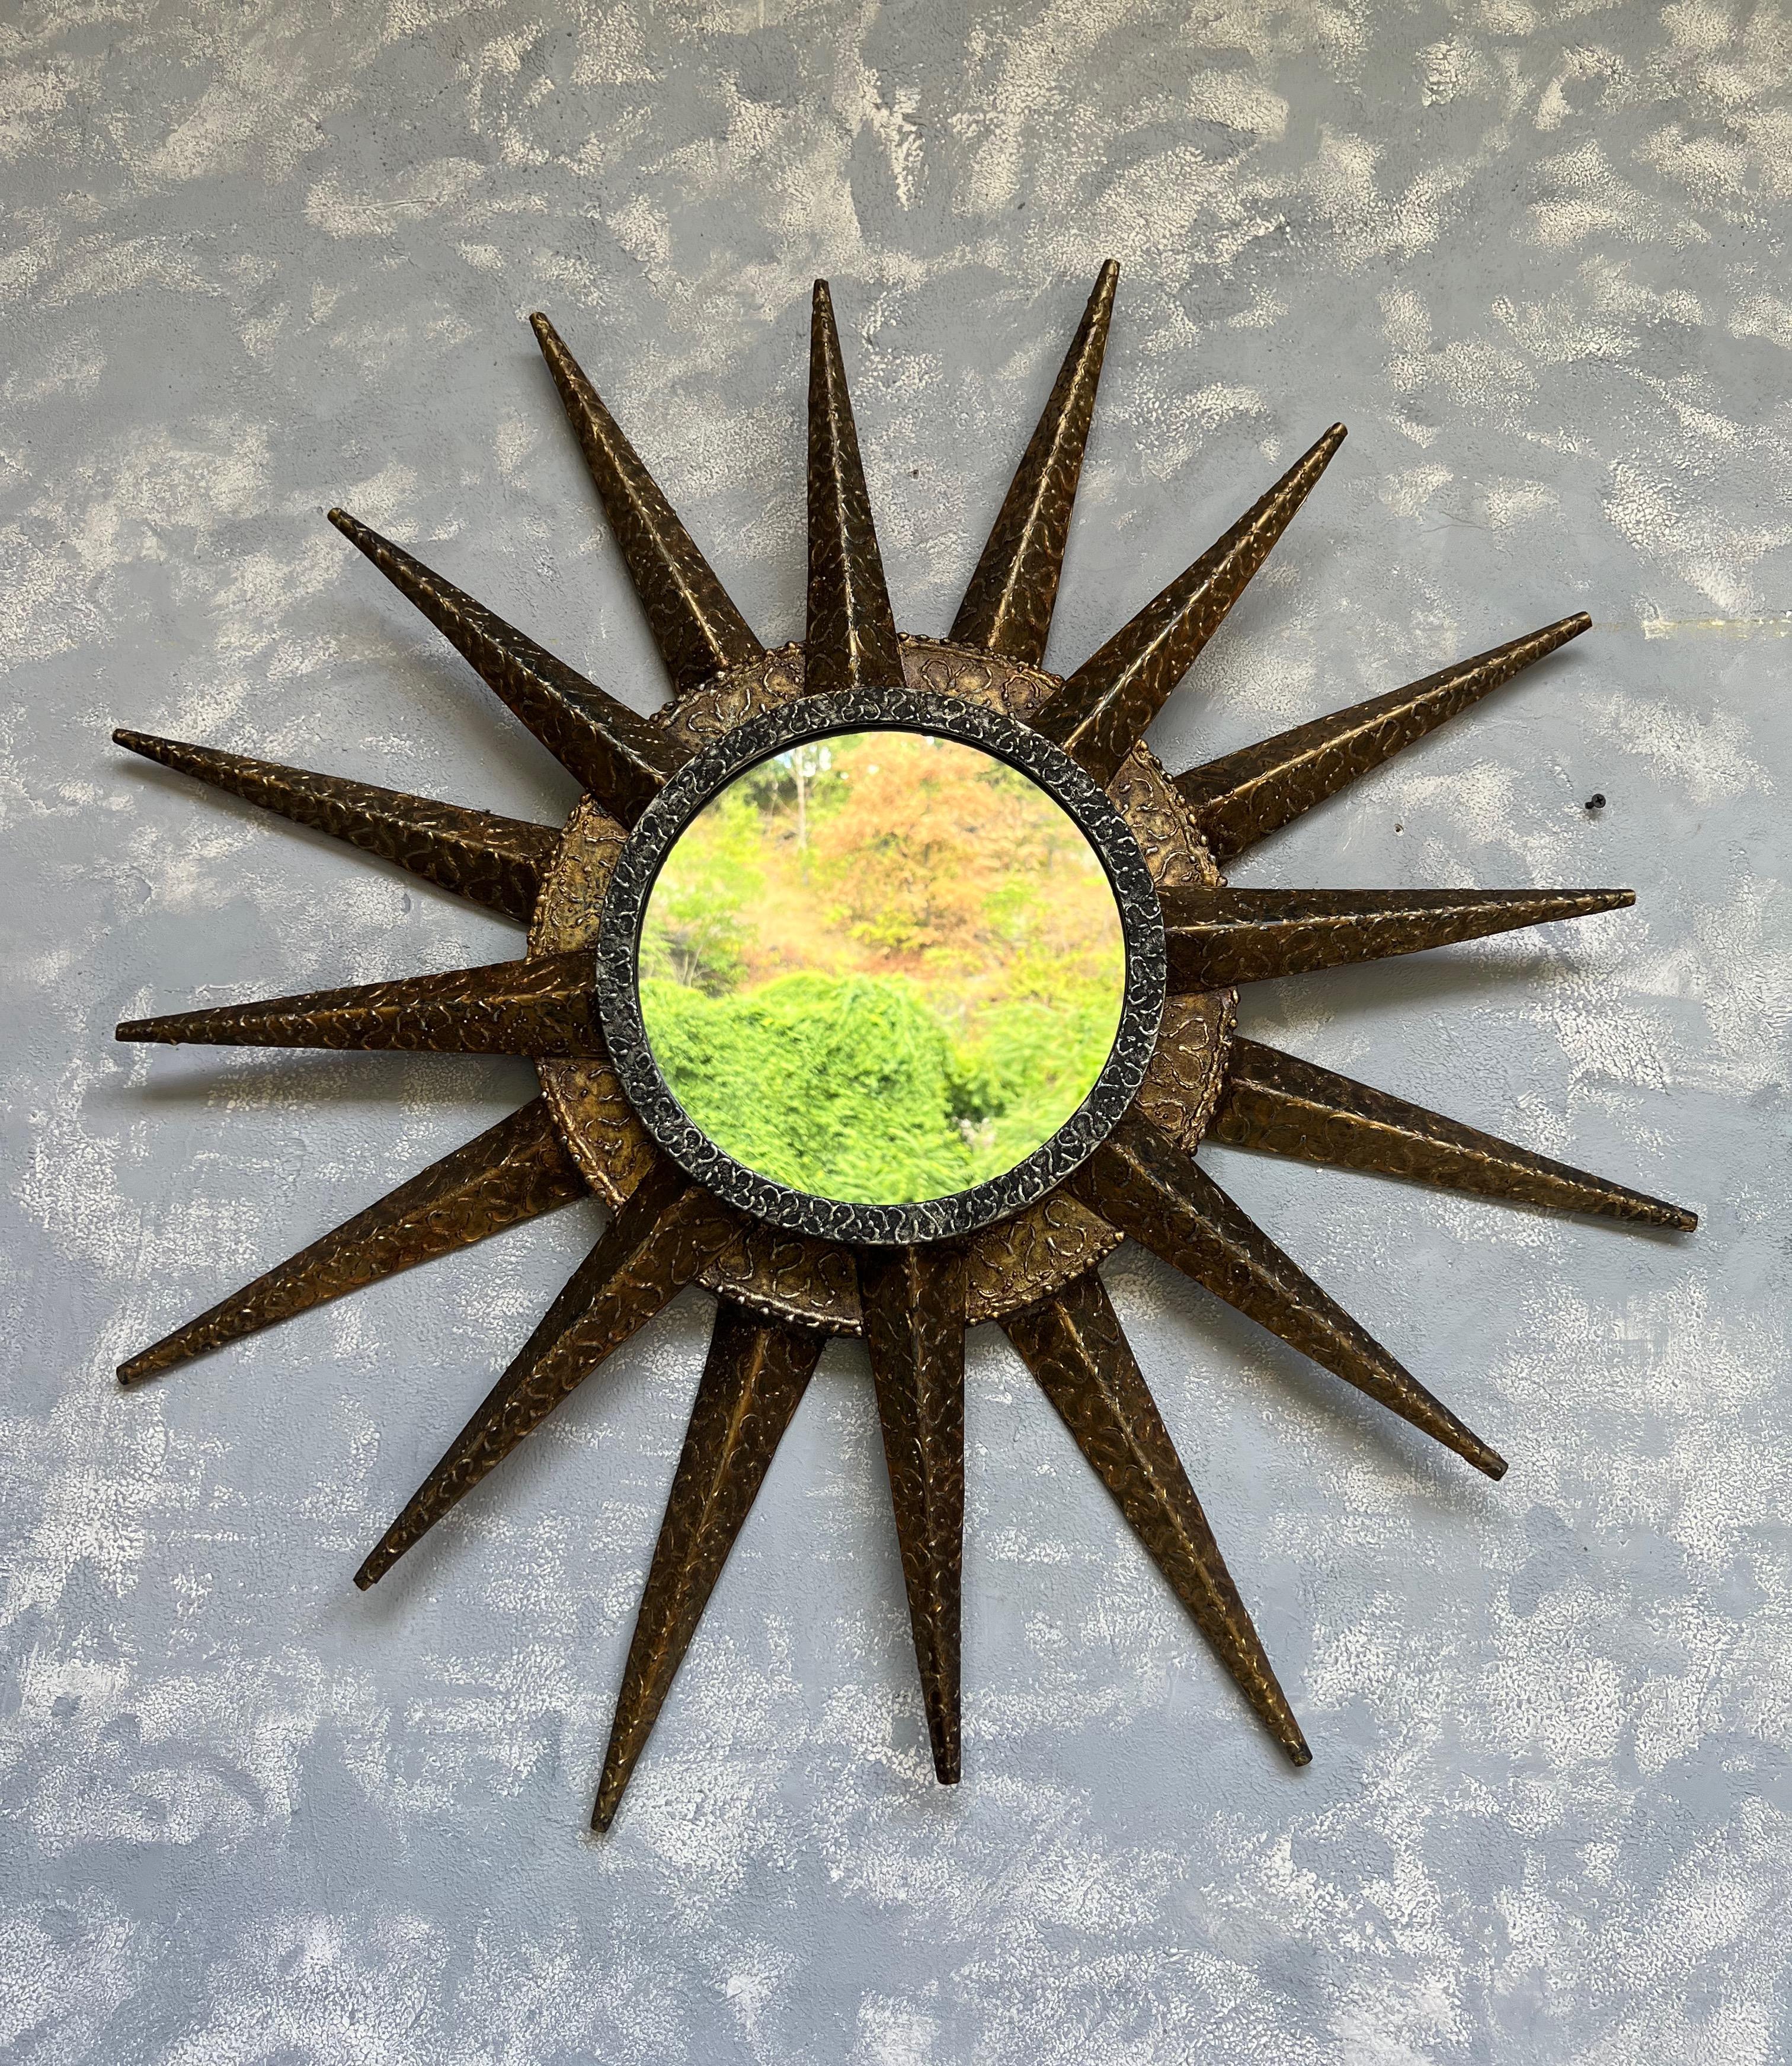 This dynamic French mid century modern sunburst mirror in the “brutalist” style features a double tiered central frame. The exterior part consists of 8 spikes in a rich gilt finish and the interior part has 8 spikes connected to a more silvered gray